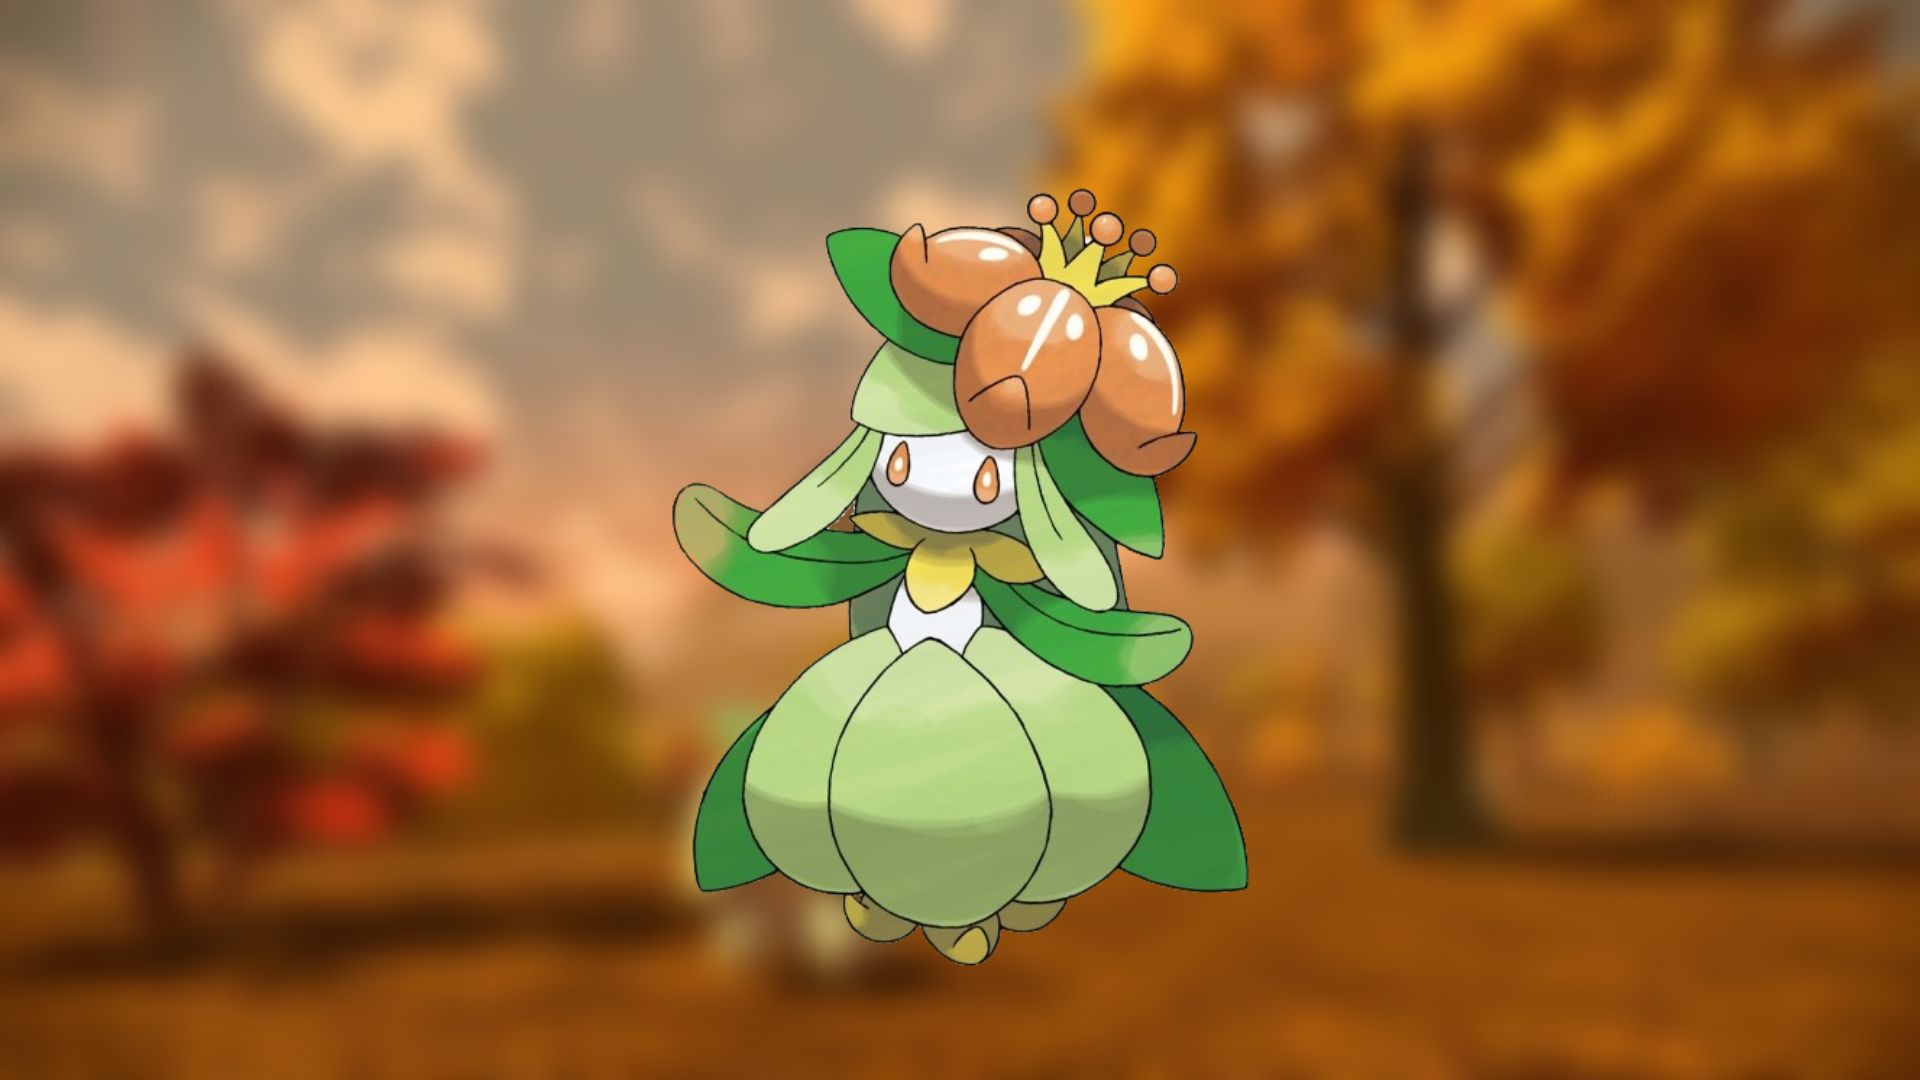 Cutest Pokémon - Lilligant. Its official artwork is over blurred scenery from Pokémon Legends: Arceus.